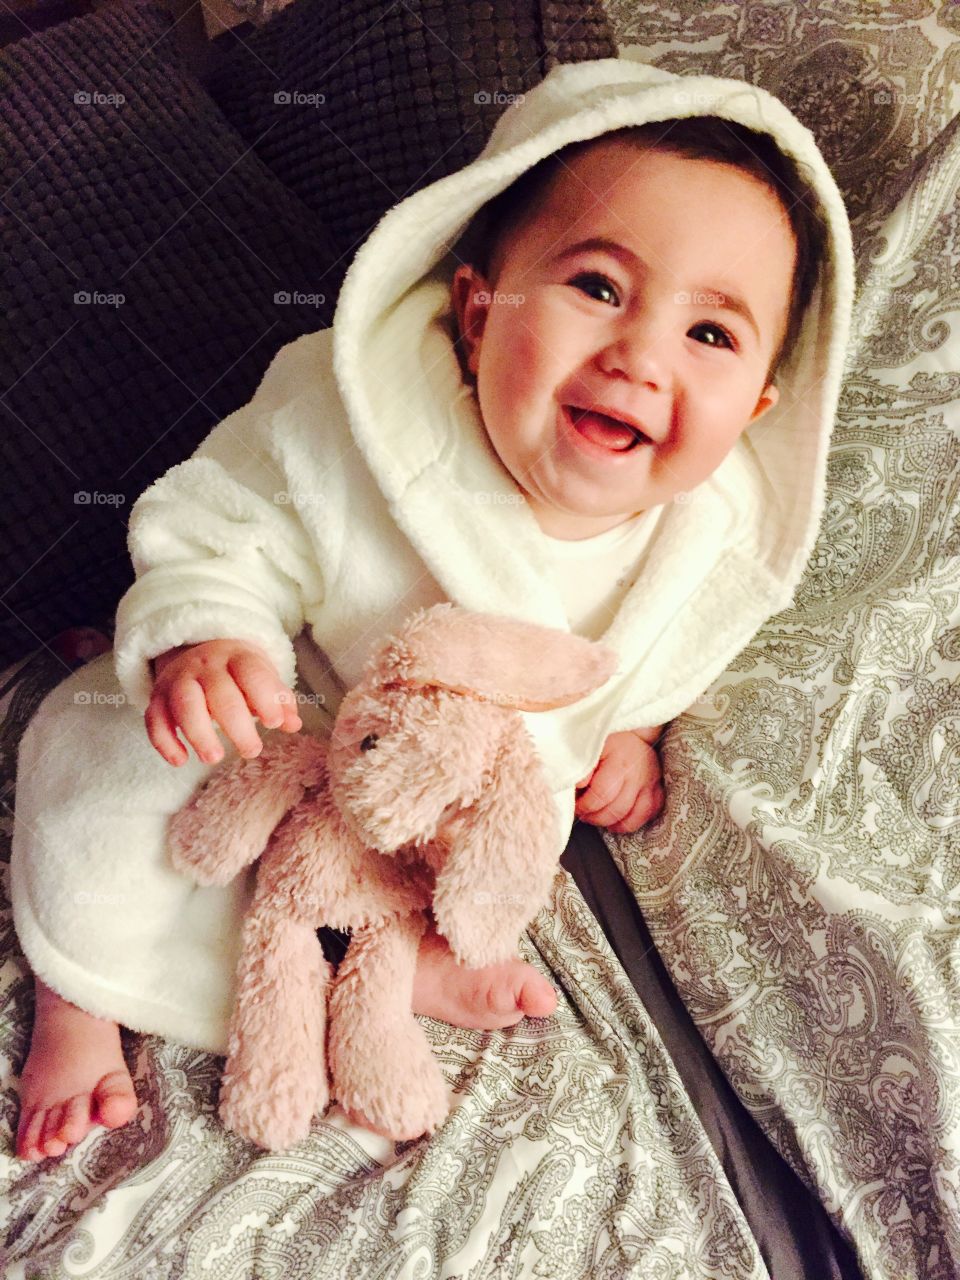 Smiling baby girl in a white fluffy robe